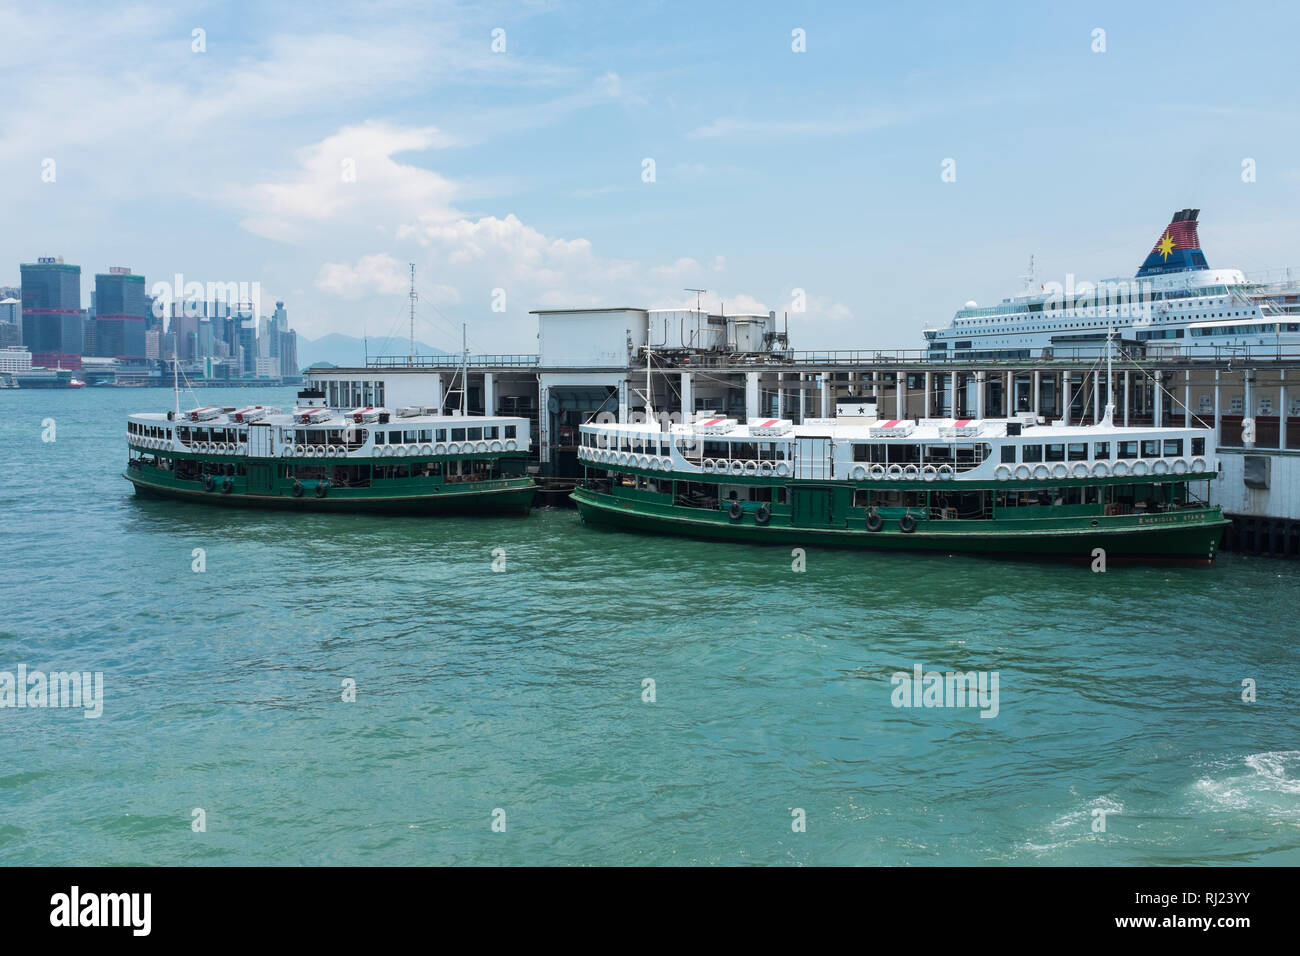 Green and white Star Ferries docked at the Star Ferry Pier on Tsim Sha Tsui, Hong Kong Stock Photo